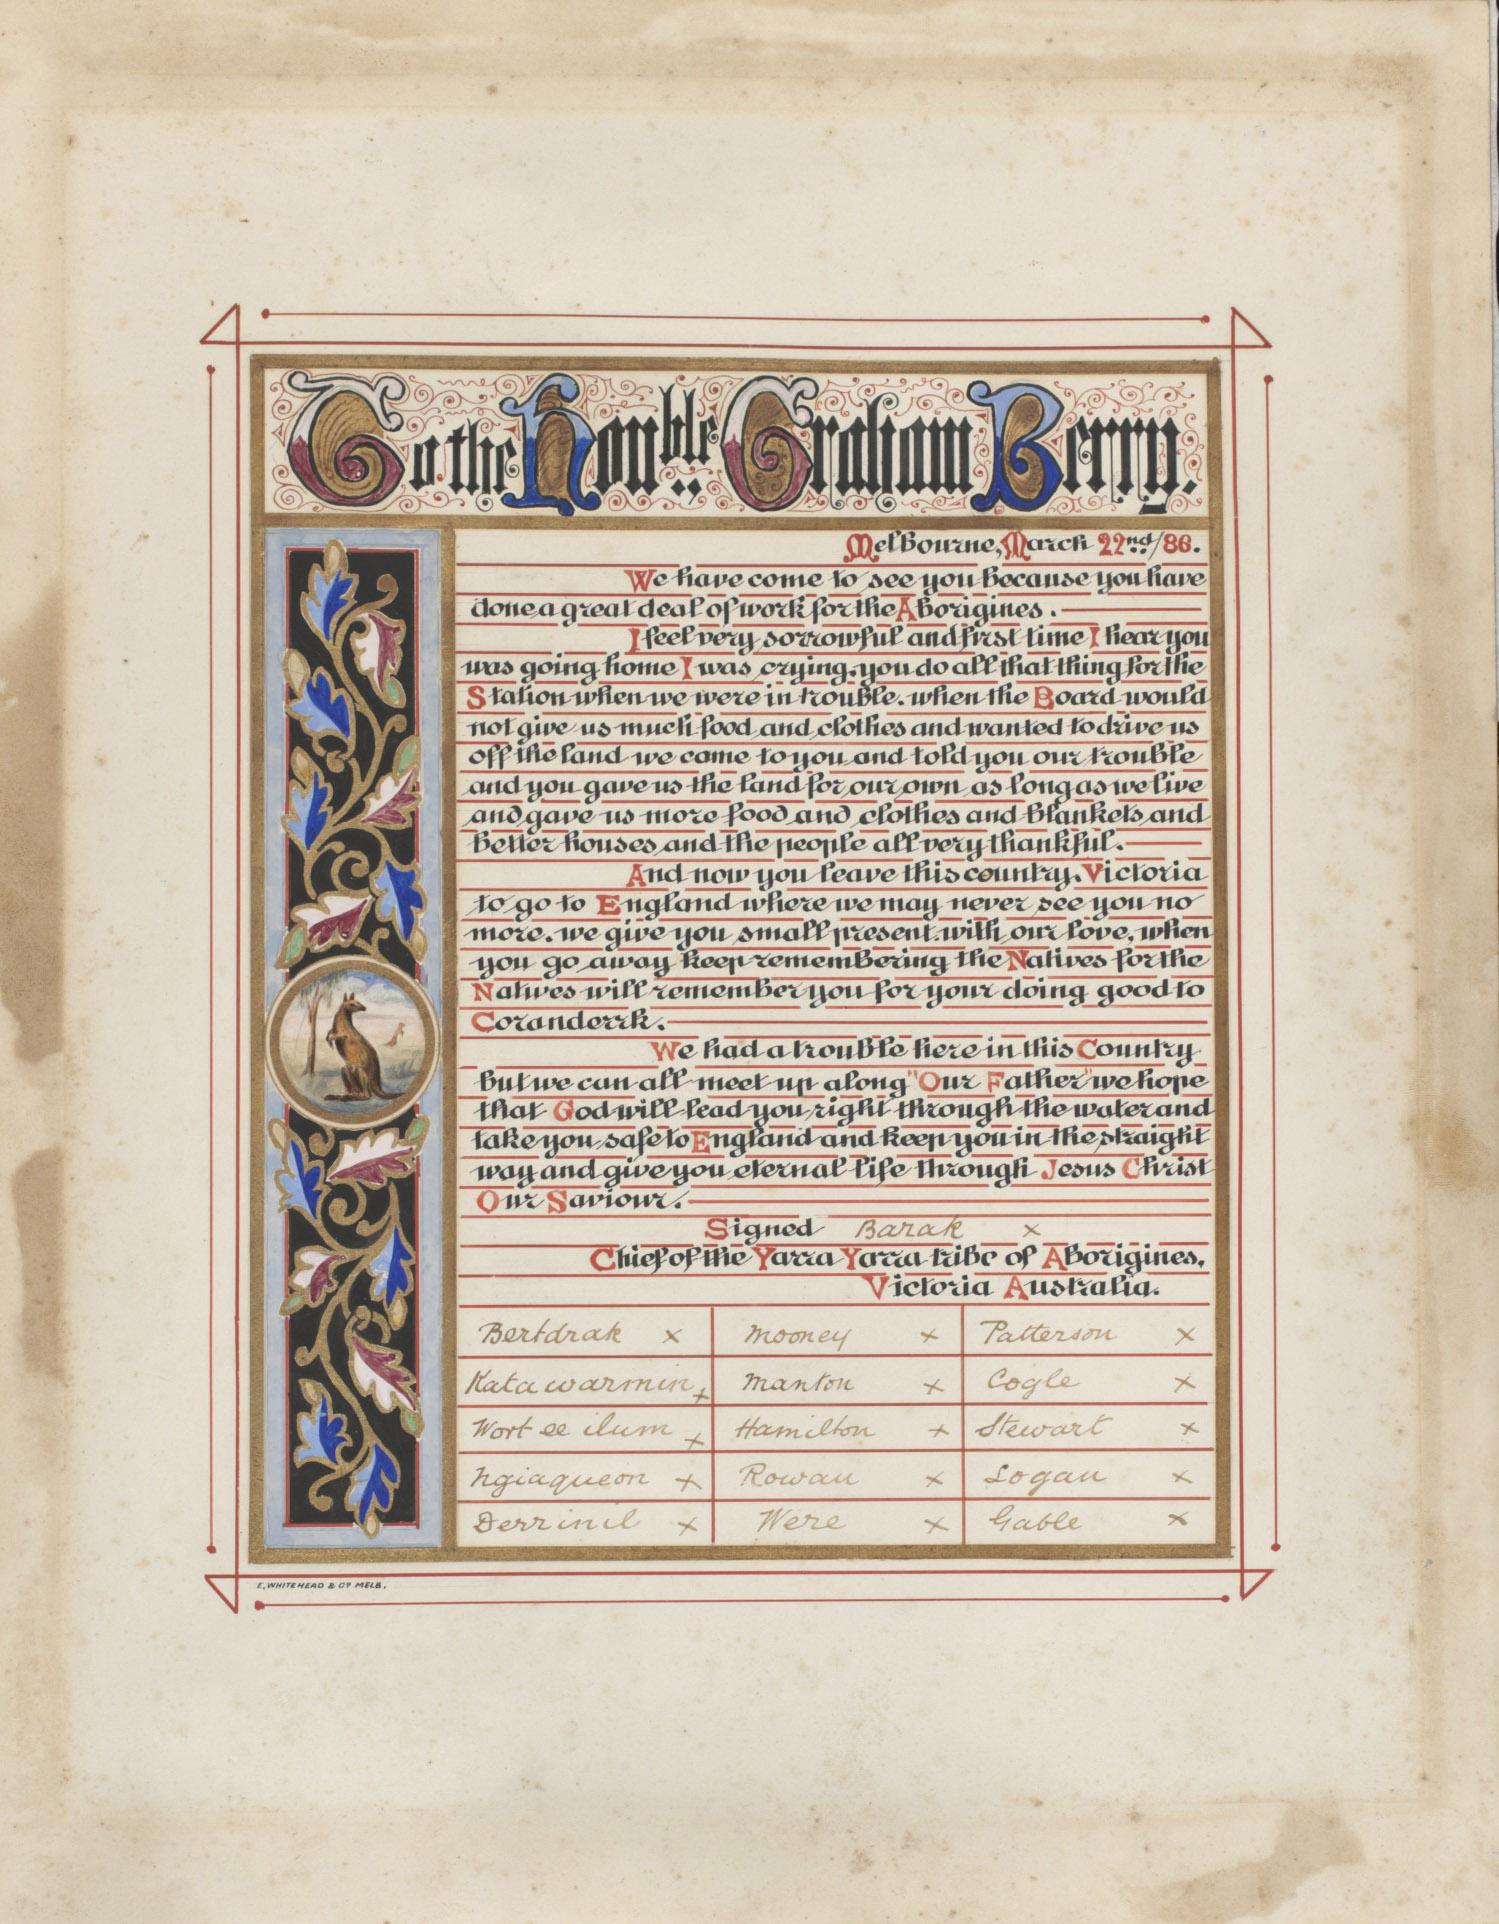 Illuminated address presented by William Barak and 15 Coranderrk residents to Graham Berry, 1886.